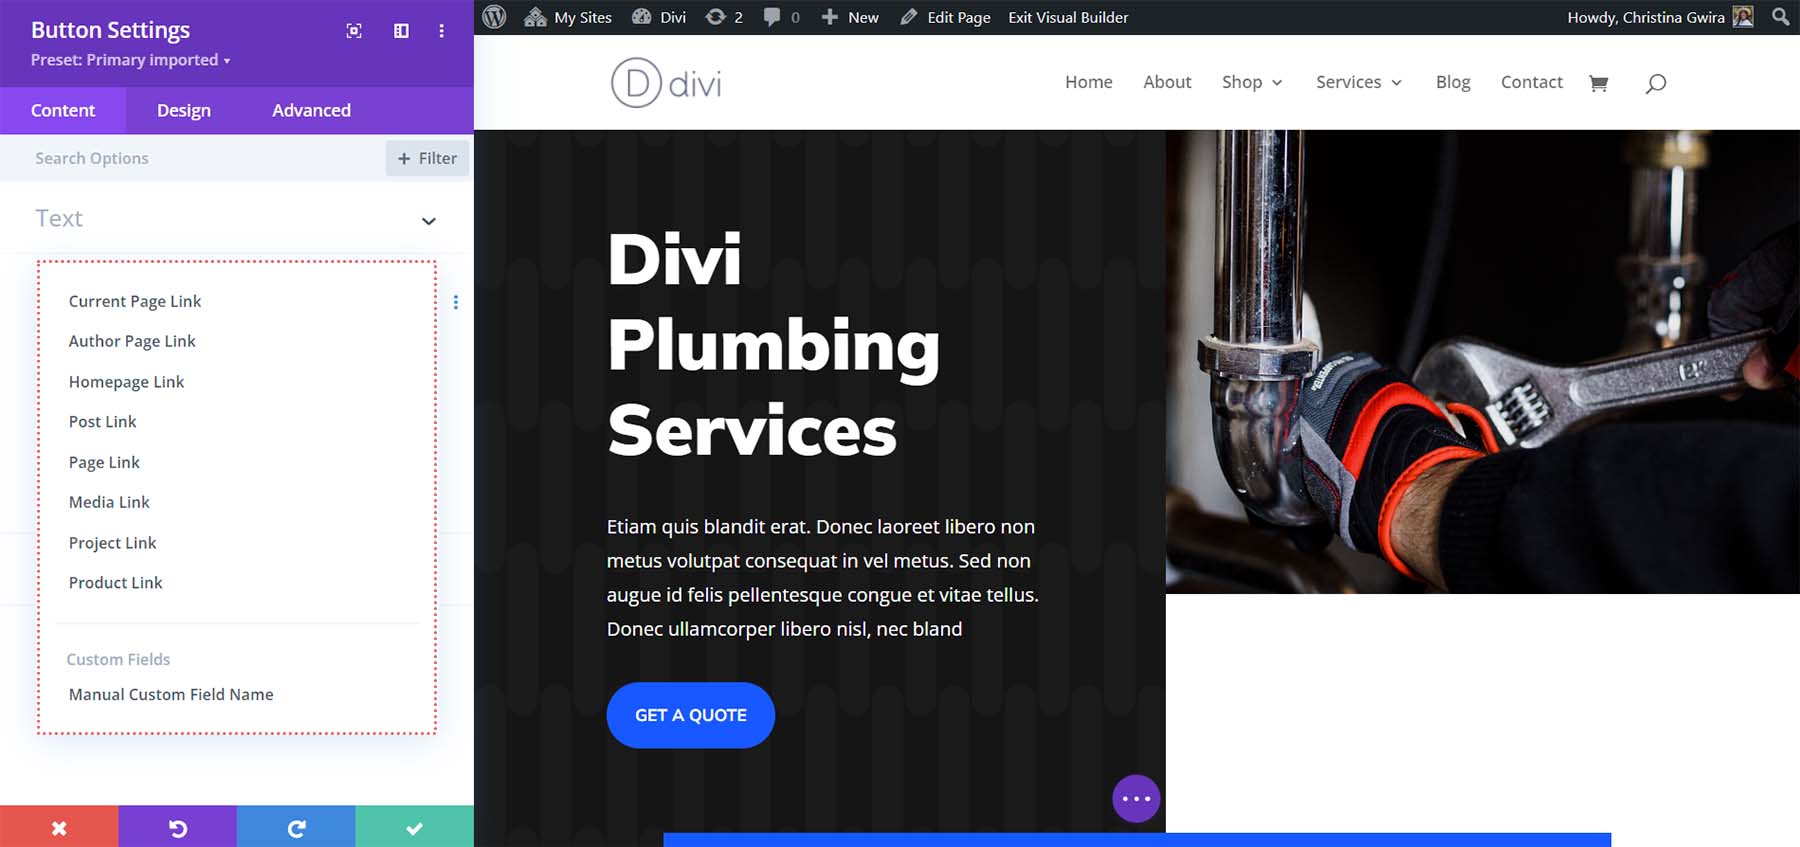 Dynamic content that you can link to within Divi